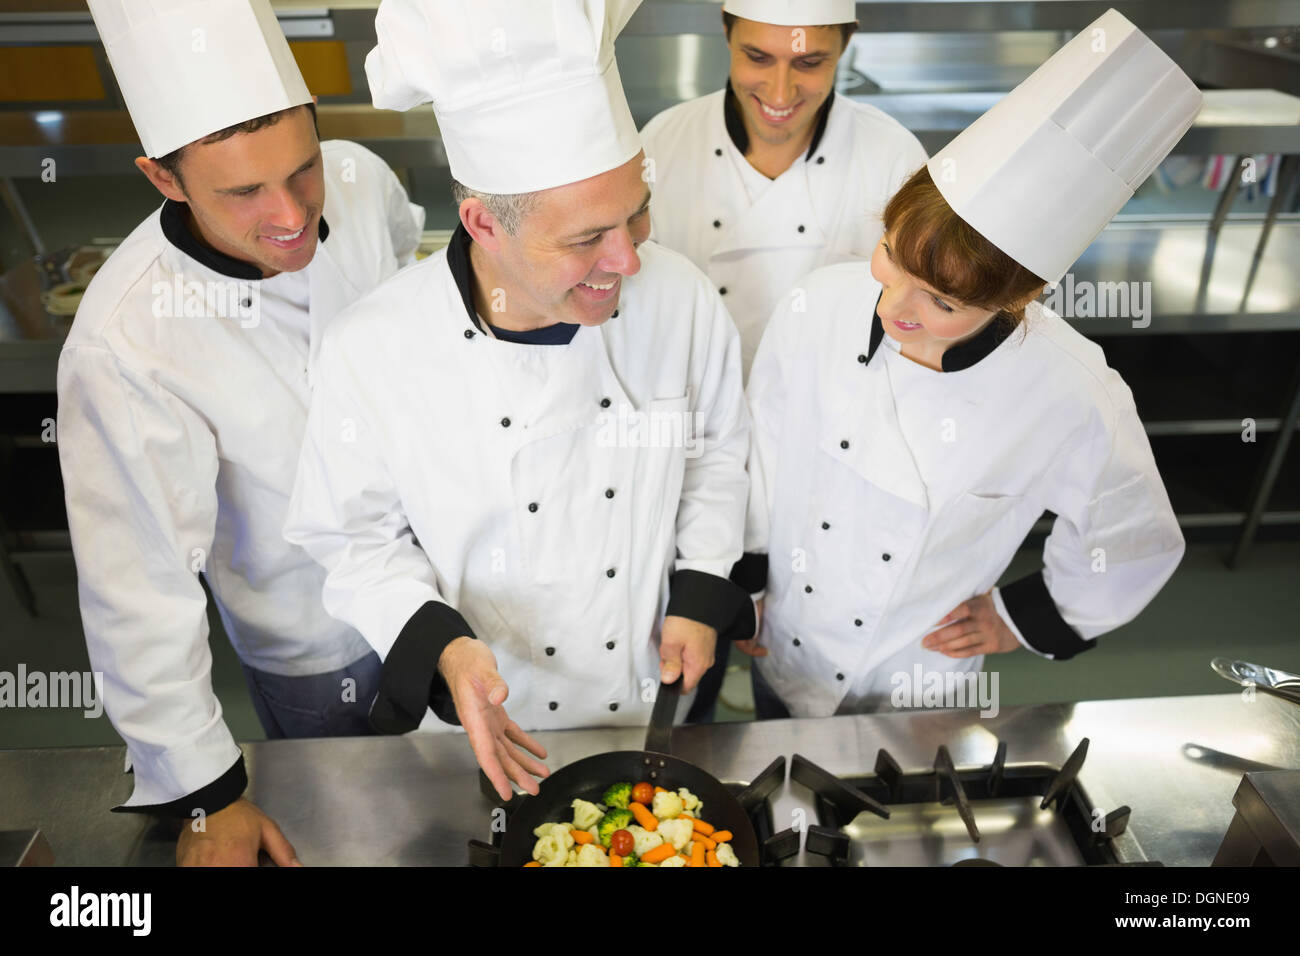 Experienced head chef showing pan to his colleagues Stock Photo